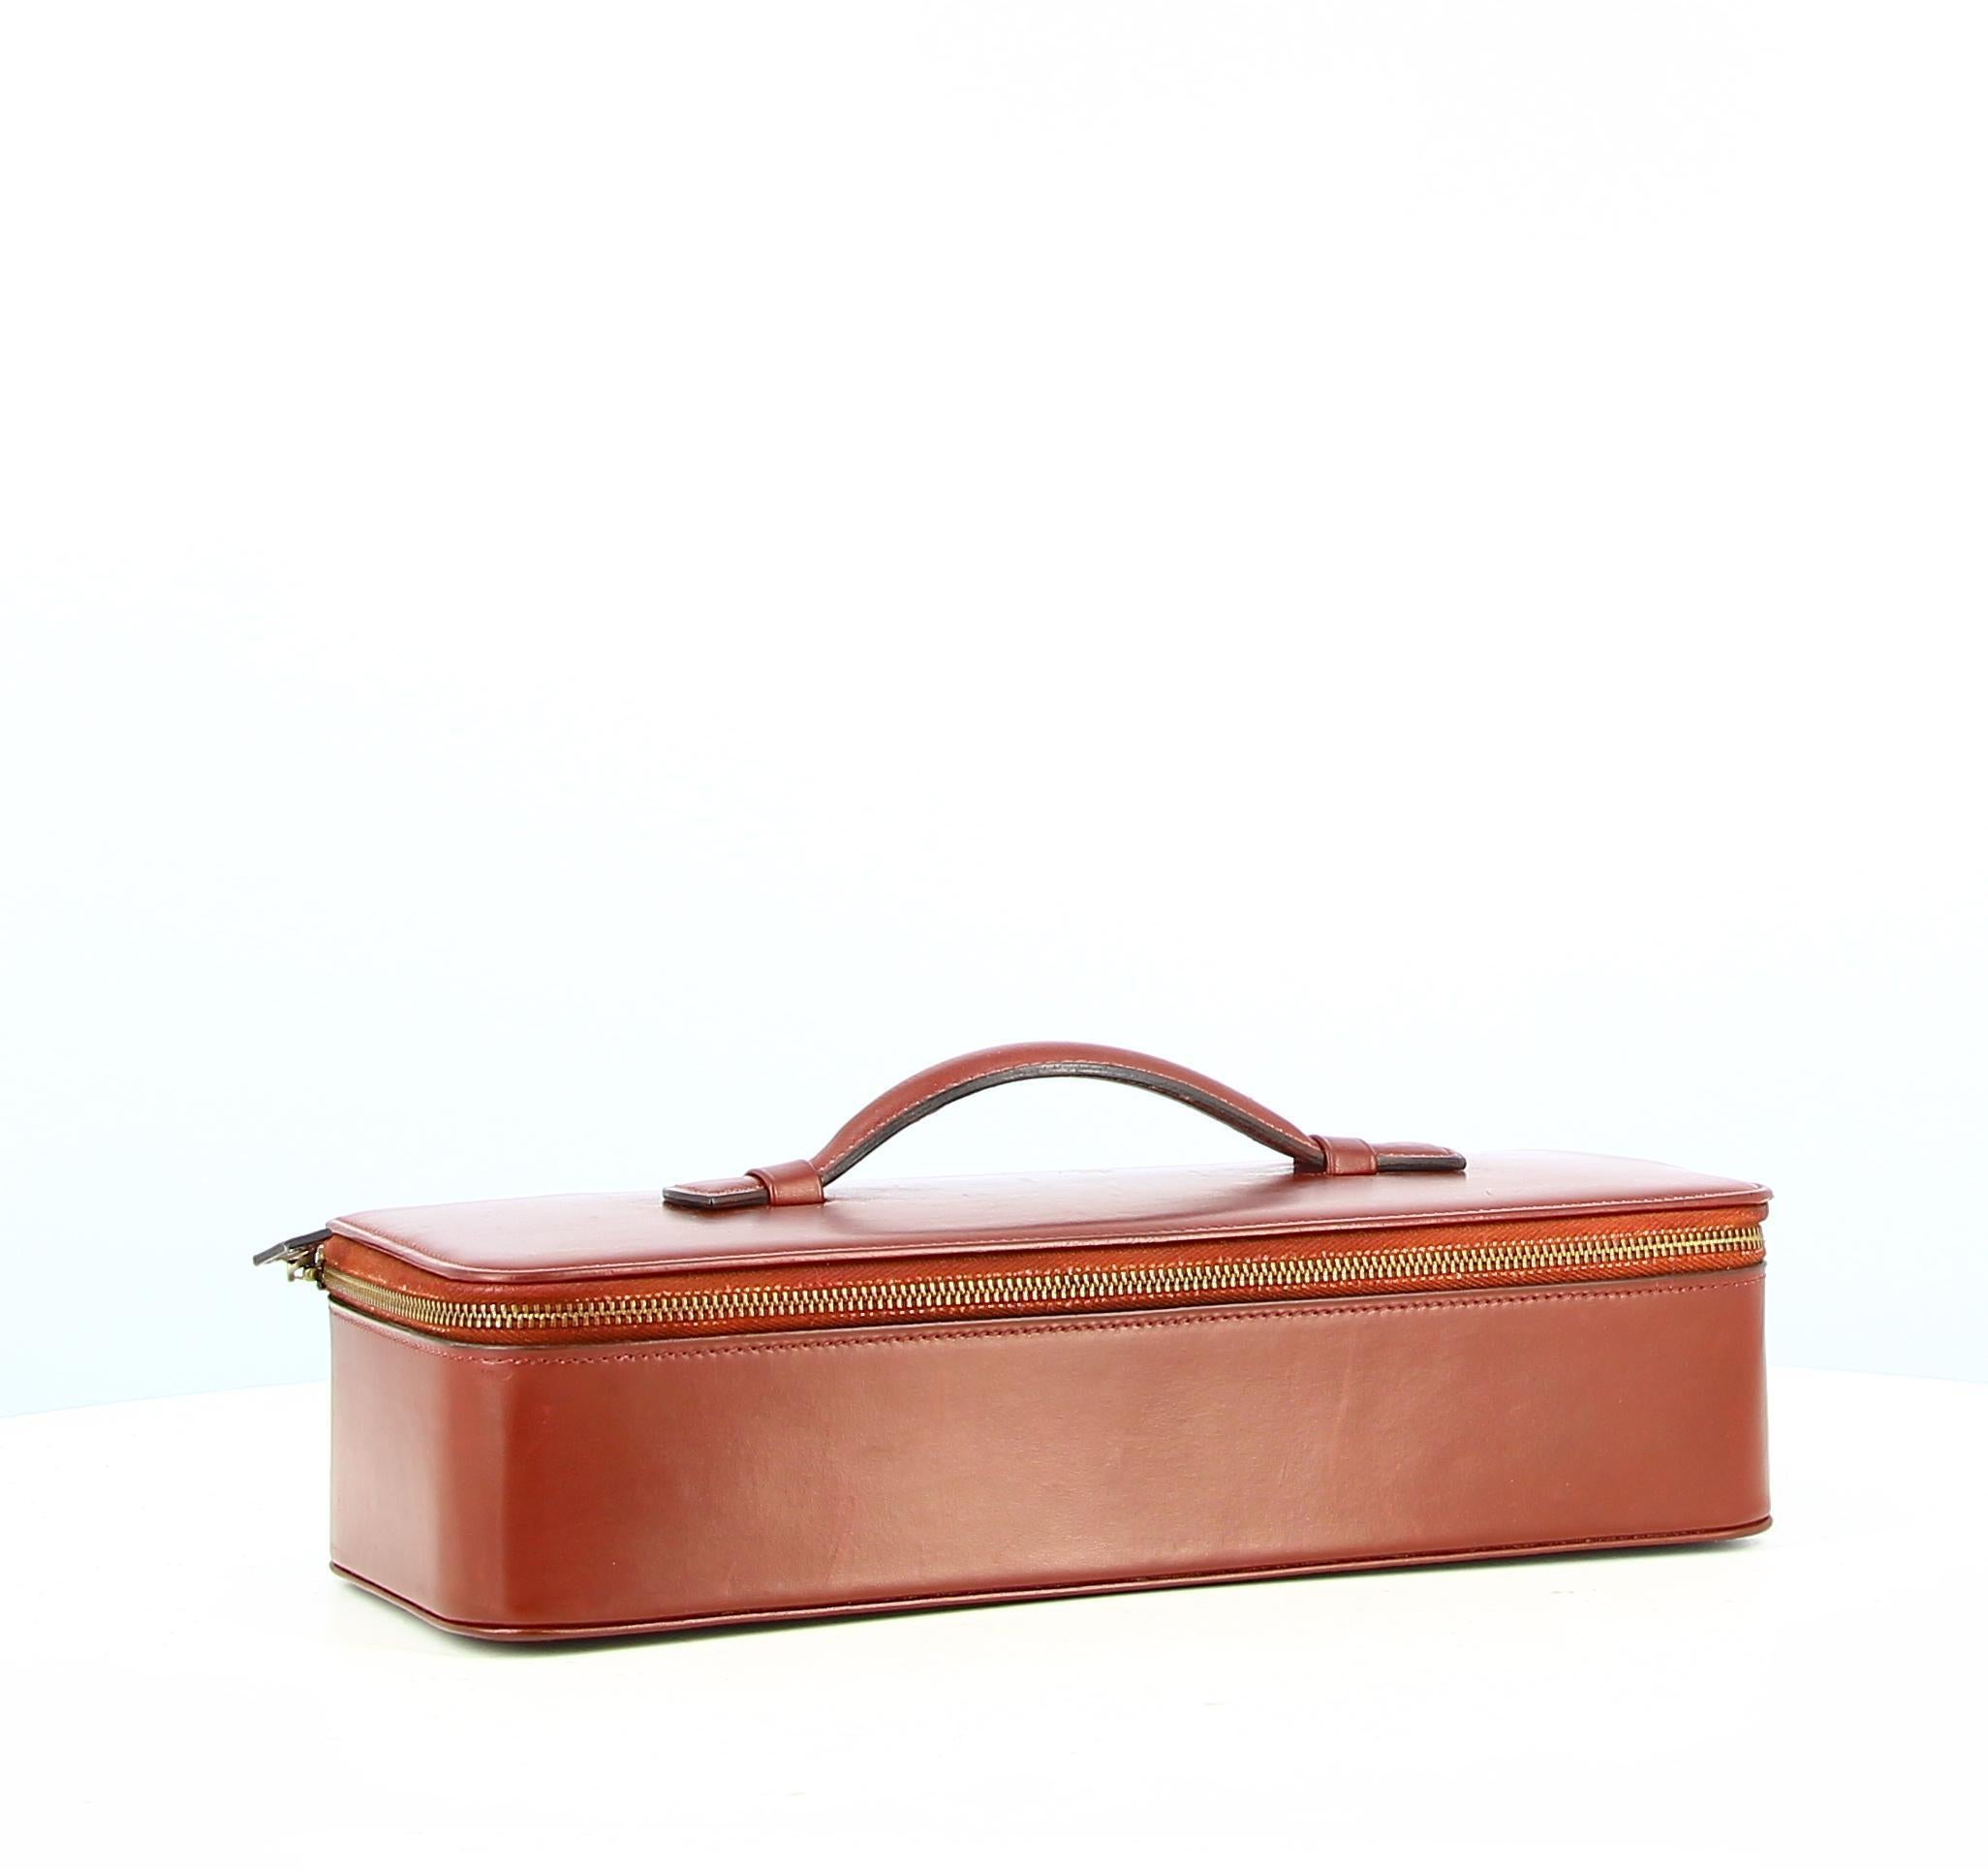 Hermes Smooth Leather Jewelry Box Burgundy
- Good condition, shows slight wear and tear over time
- Hermes burgundy jewelry box, golden zipper, small hanse
- The interior is in velvet burgundy, several parts to insert the jewelry
Packaging :